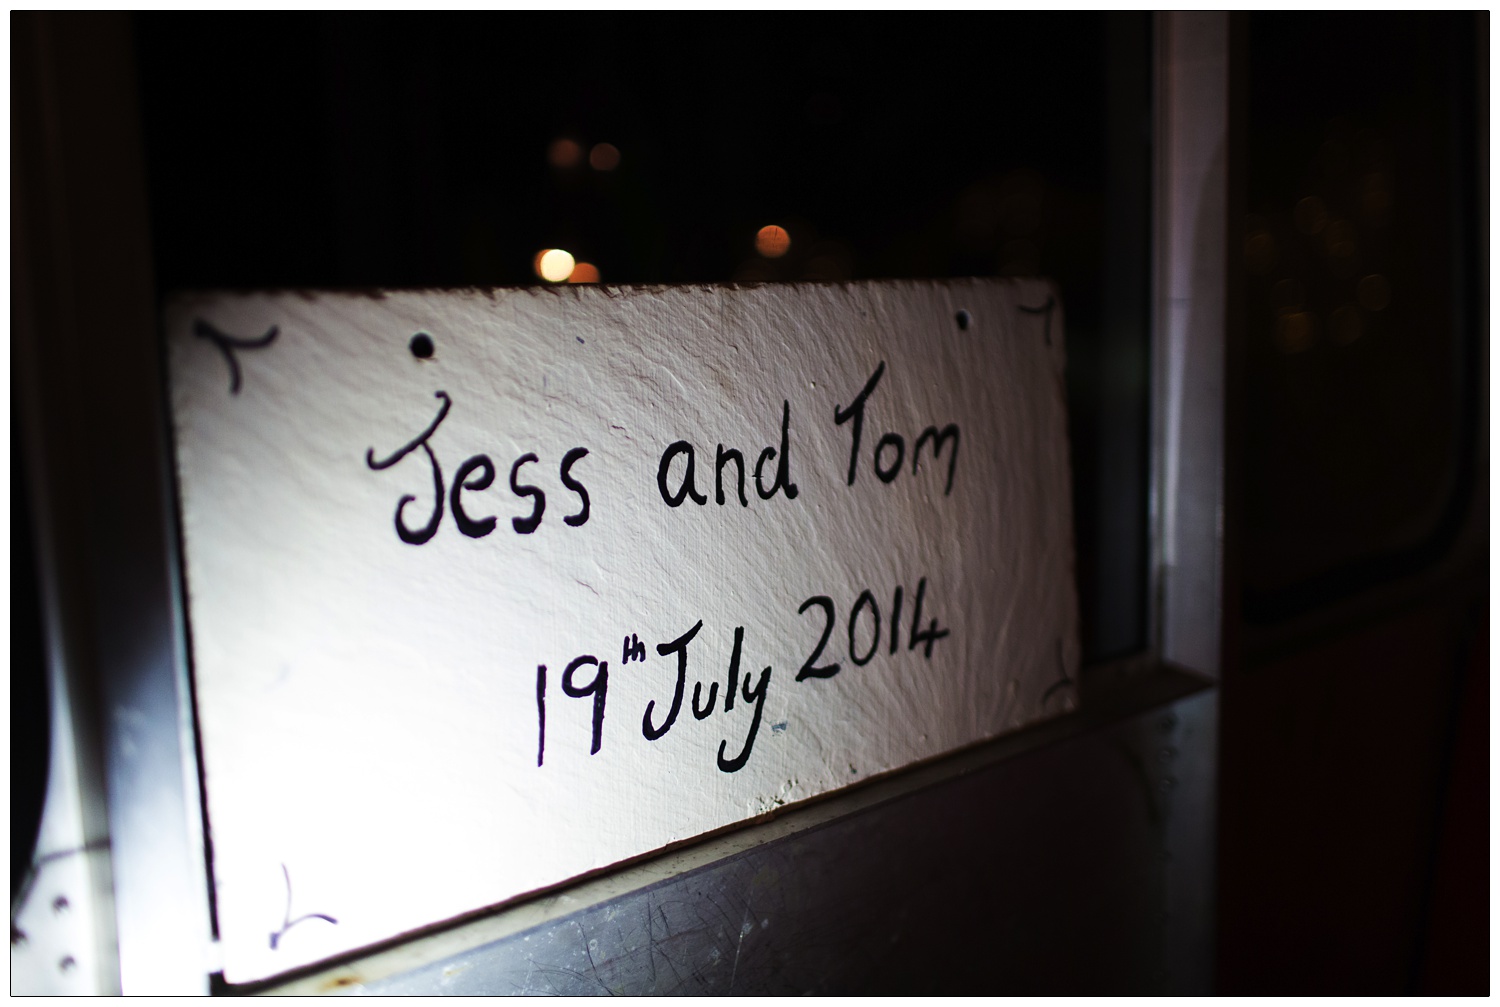 A sign saying "Jess and Tom 19th July 2014".